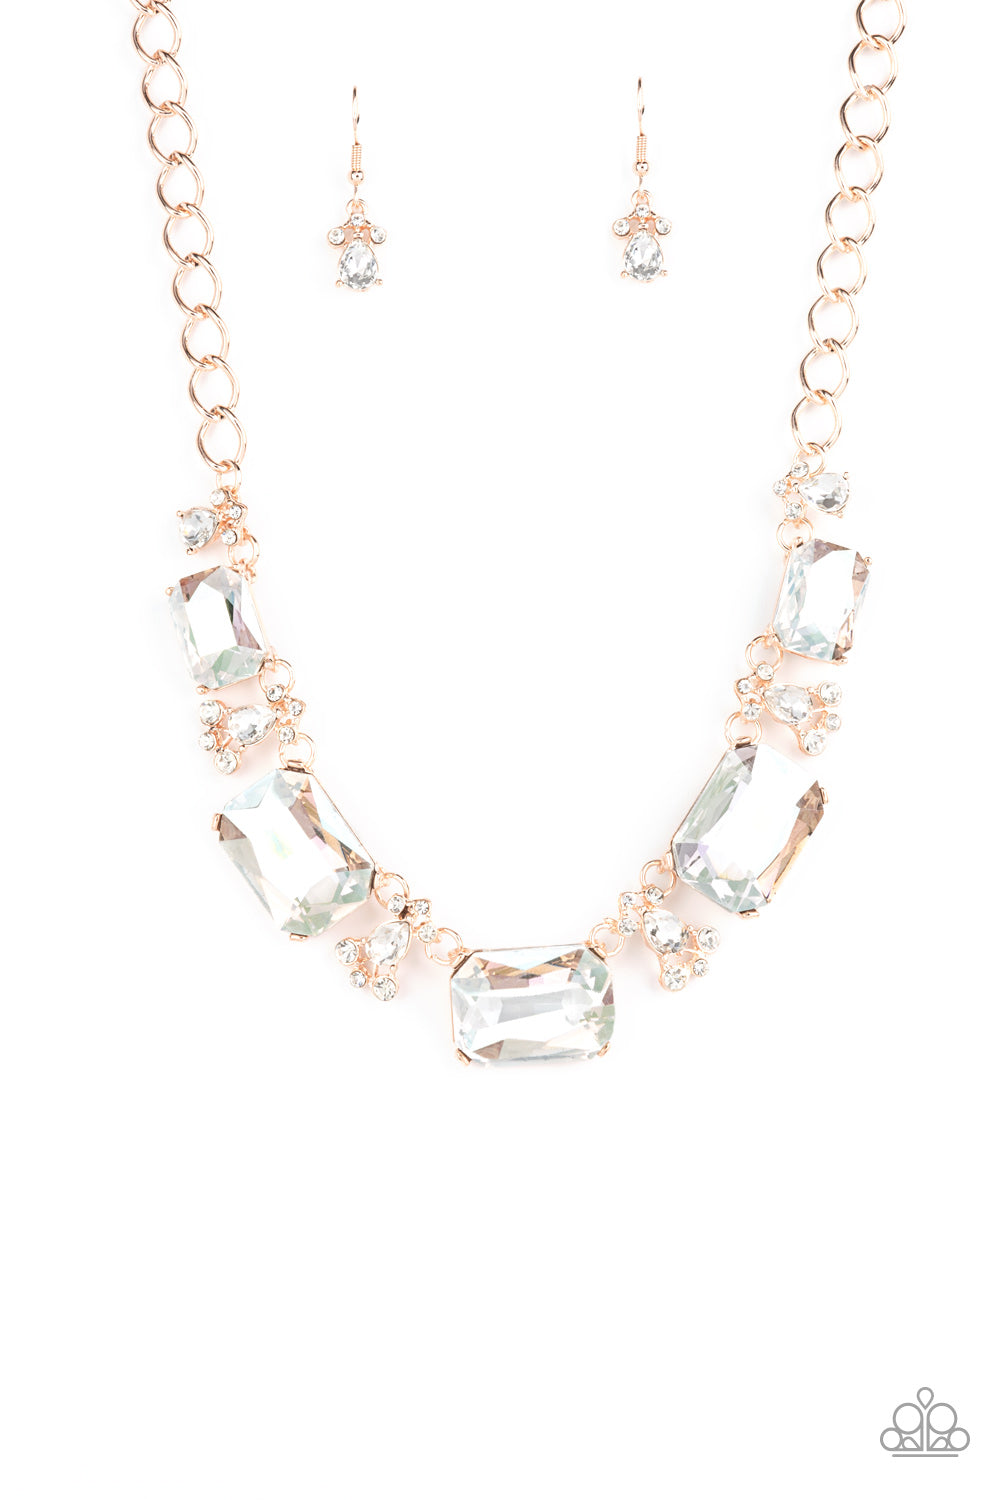 Flawlessly Famous Rose Gold Multi Necklace Set Sept 2021 Life of the Party Exclusive - Princess Glam Shop